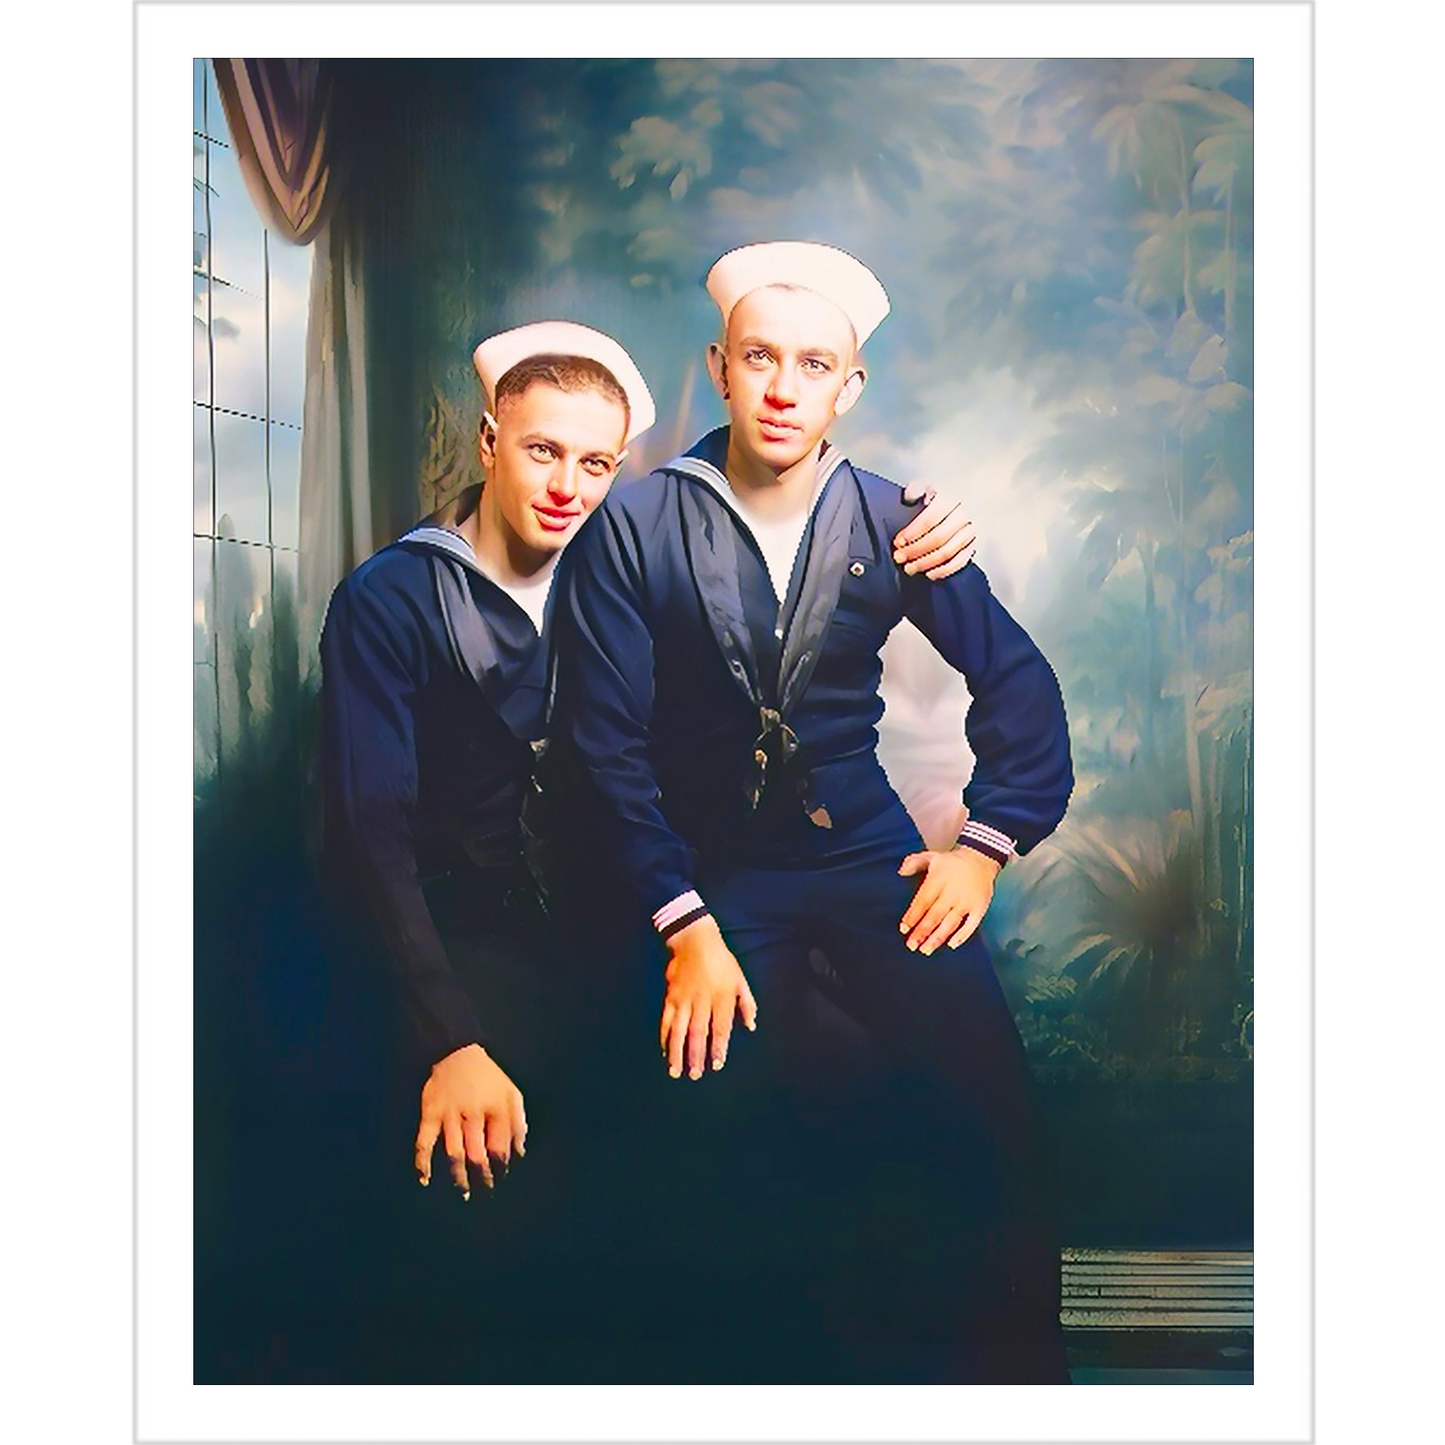 paire 017 | Giclee Artist Print Vintage Affectionate Men Couple Gay USN Uniform Queer LGBTQ Navy